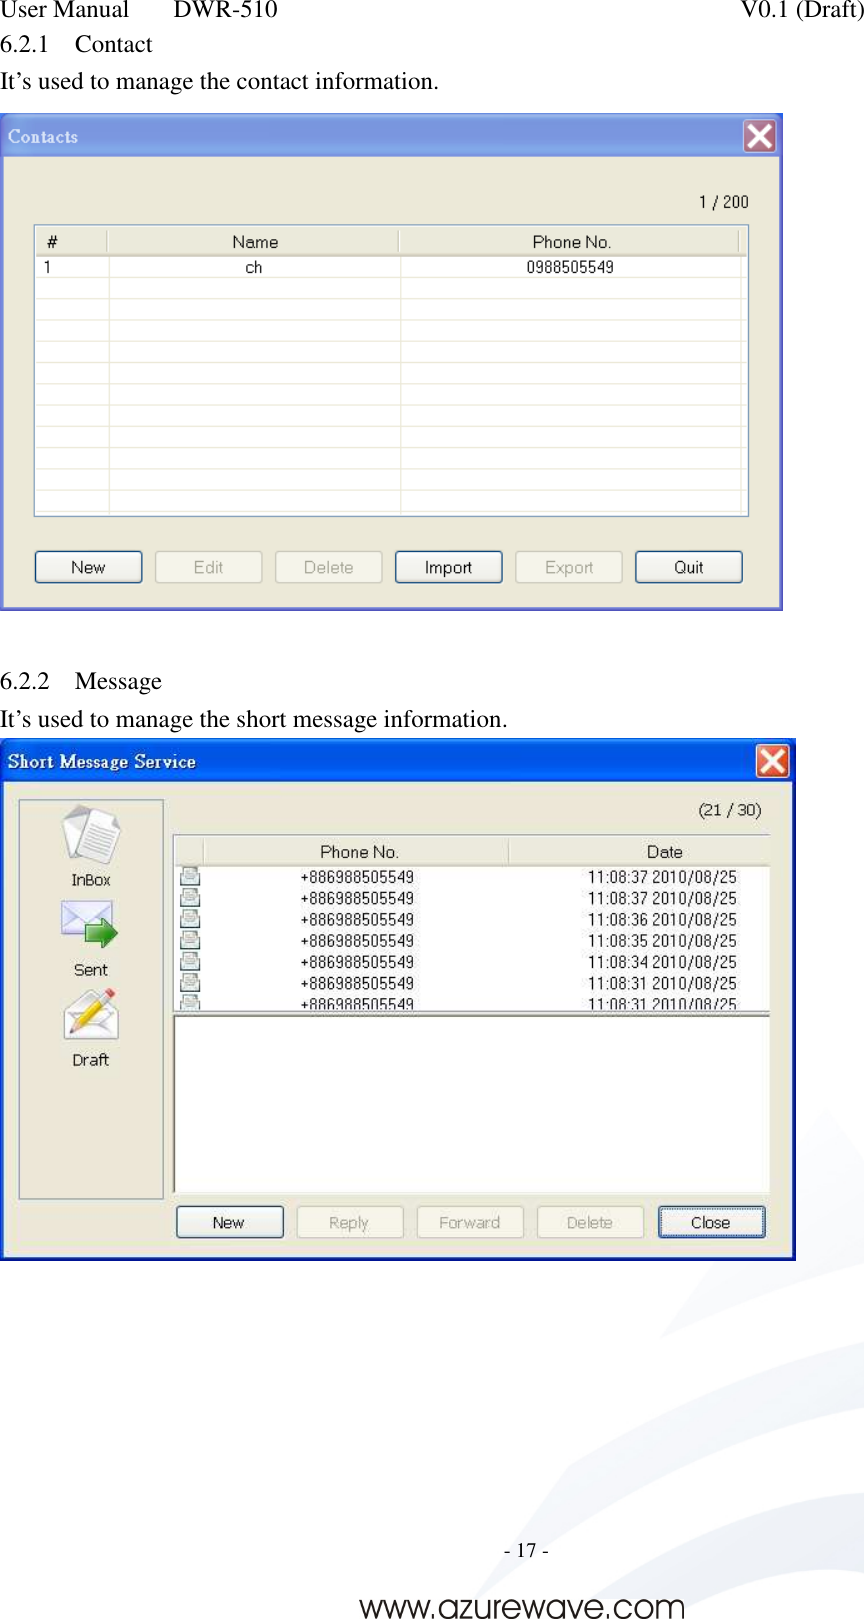 User Manual    DWR-510    V0.1 (Draft)     - 17 -  6.2.1 Contact It’s used to manage the contact information.   6.2.2 Message It’s used to manage the short message information.   